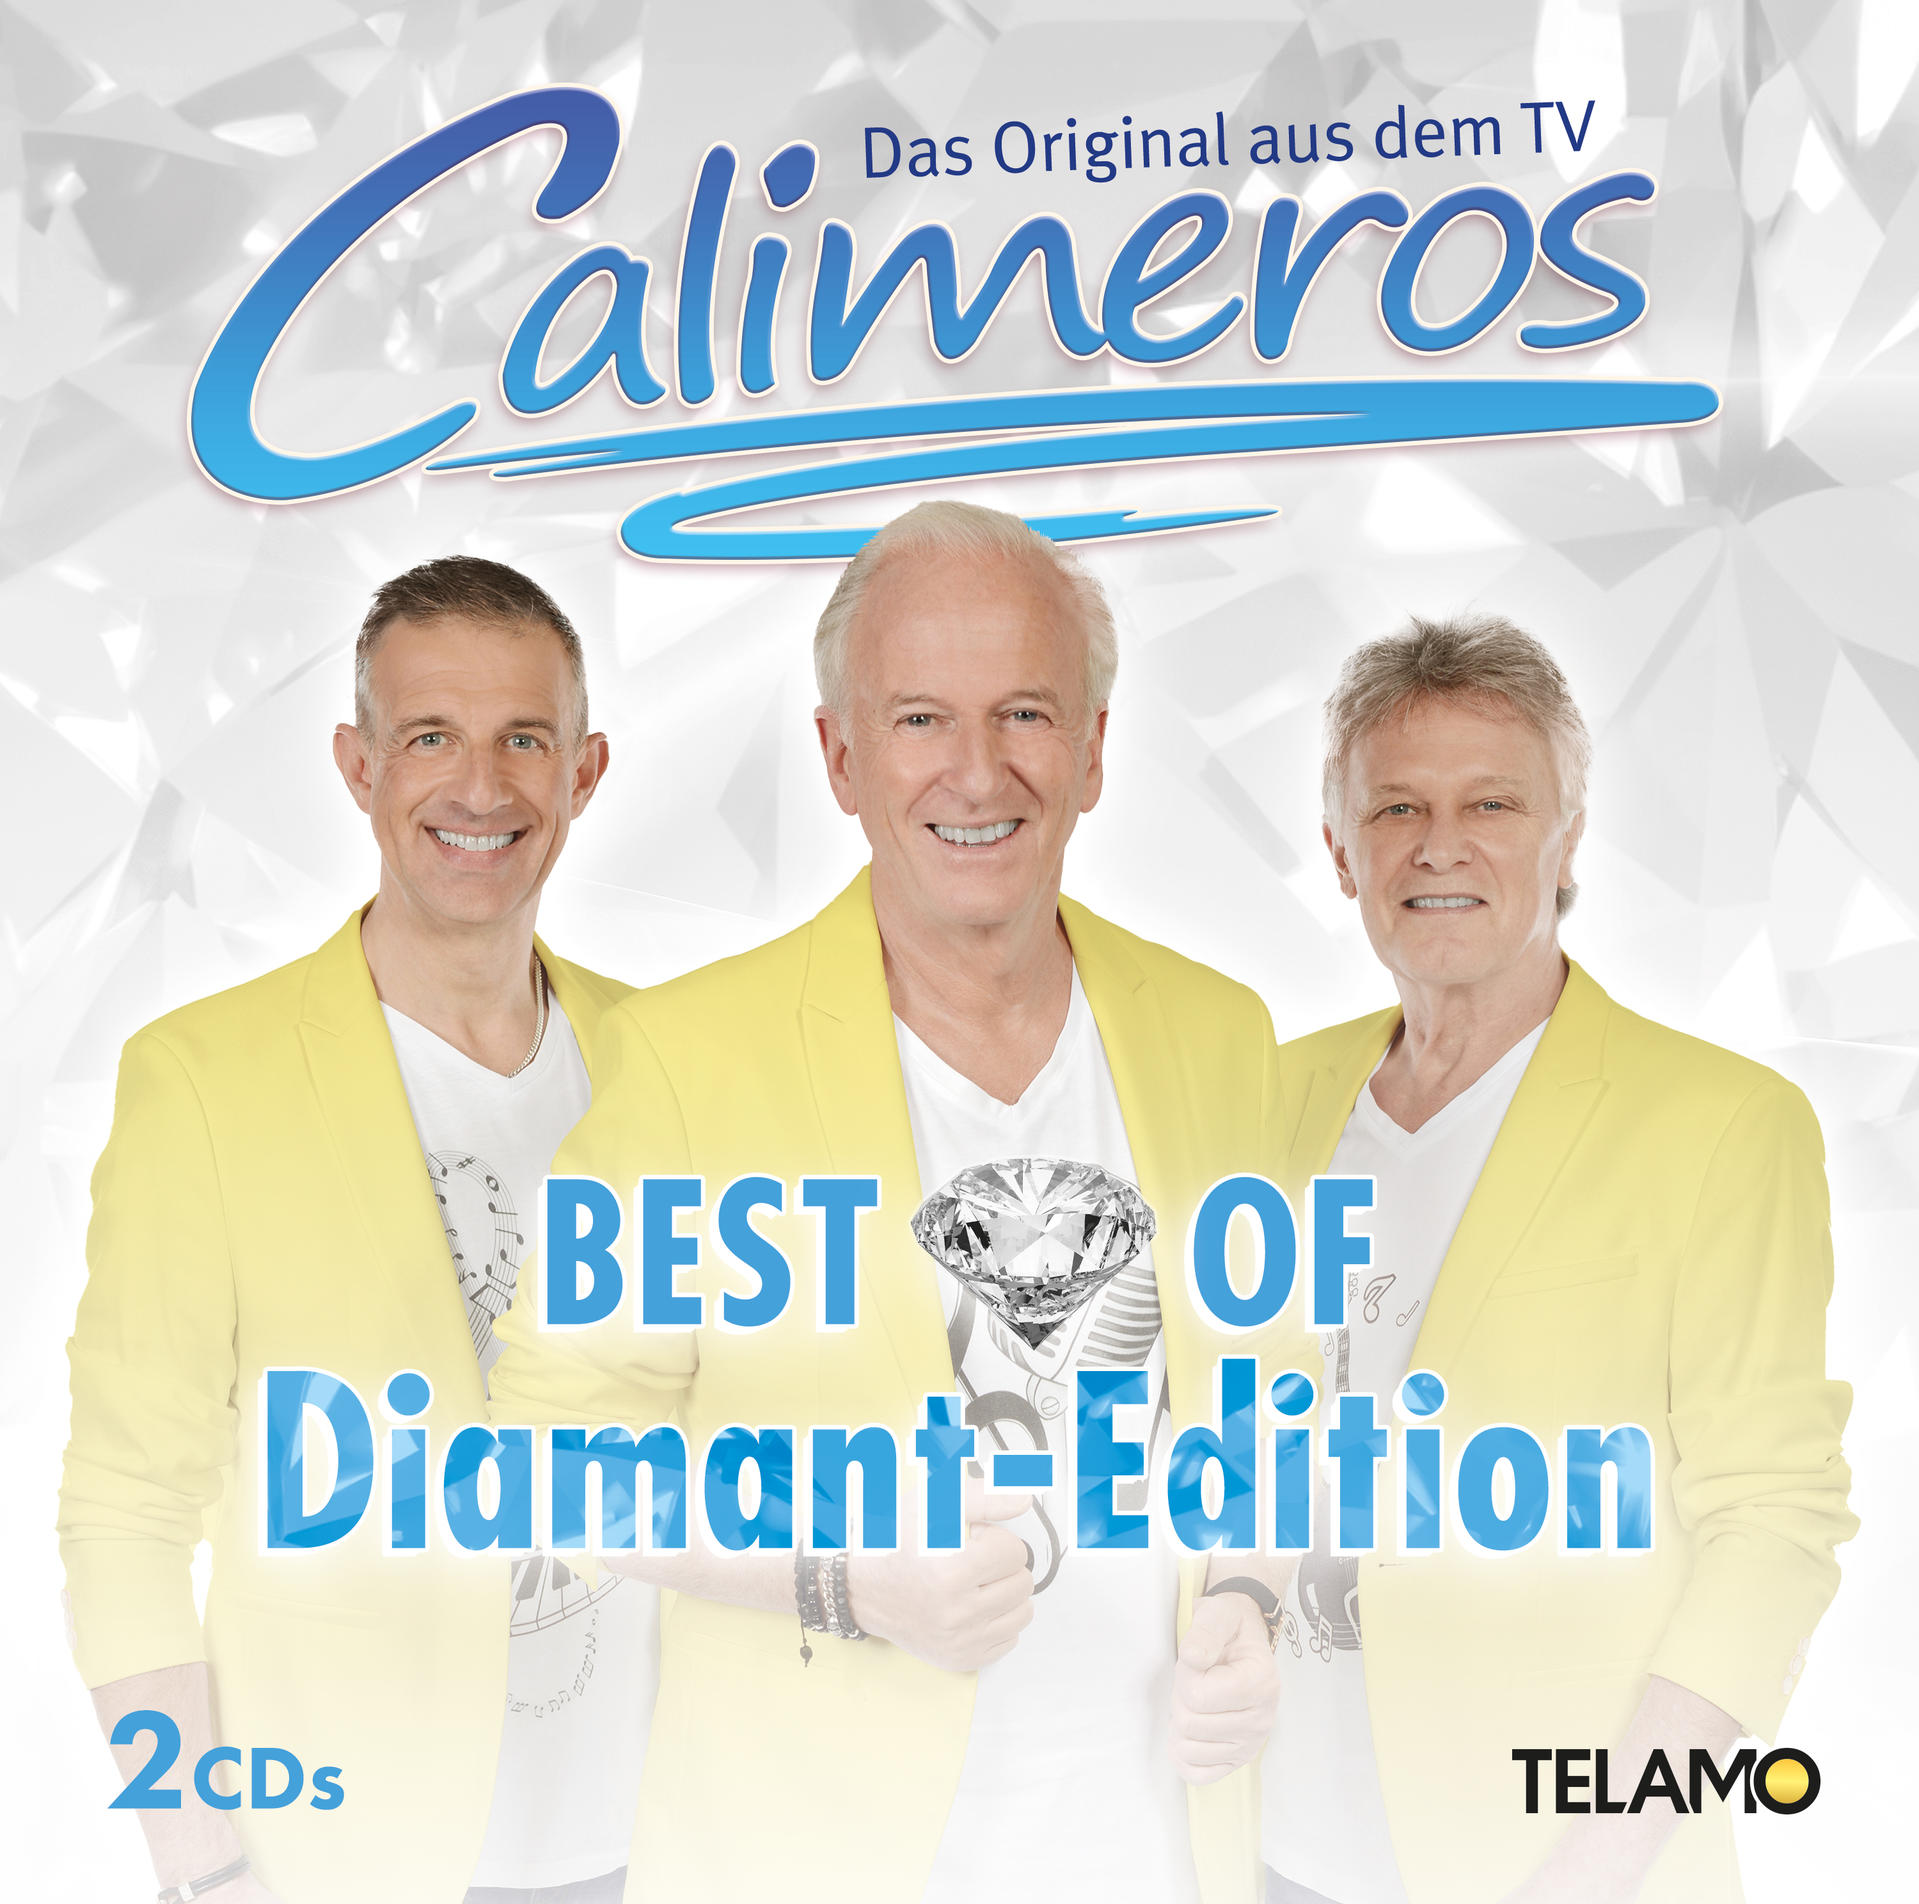 Calimeros Of(Diamant-Edition) Best - - (CD)